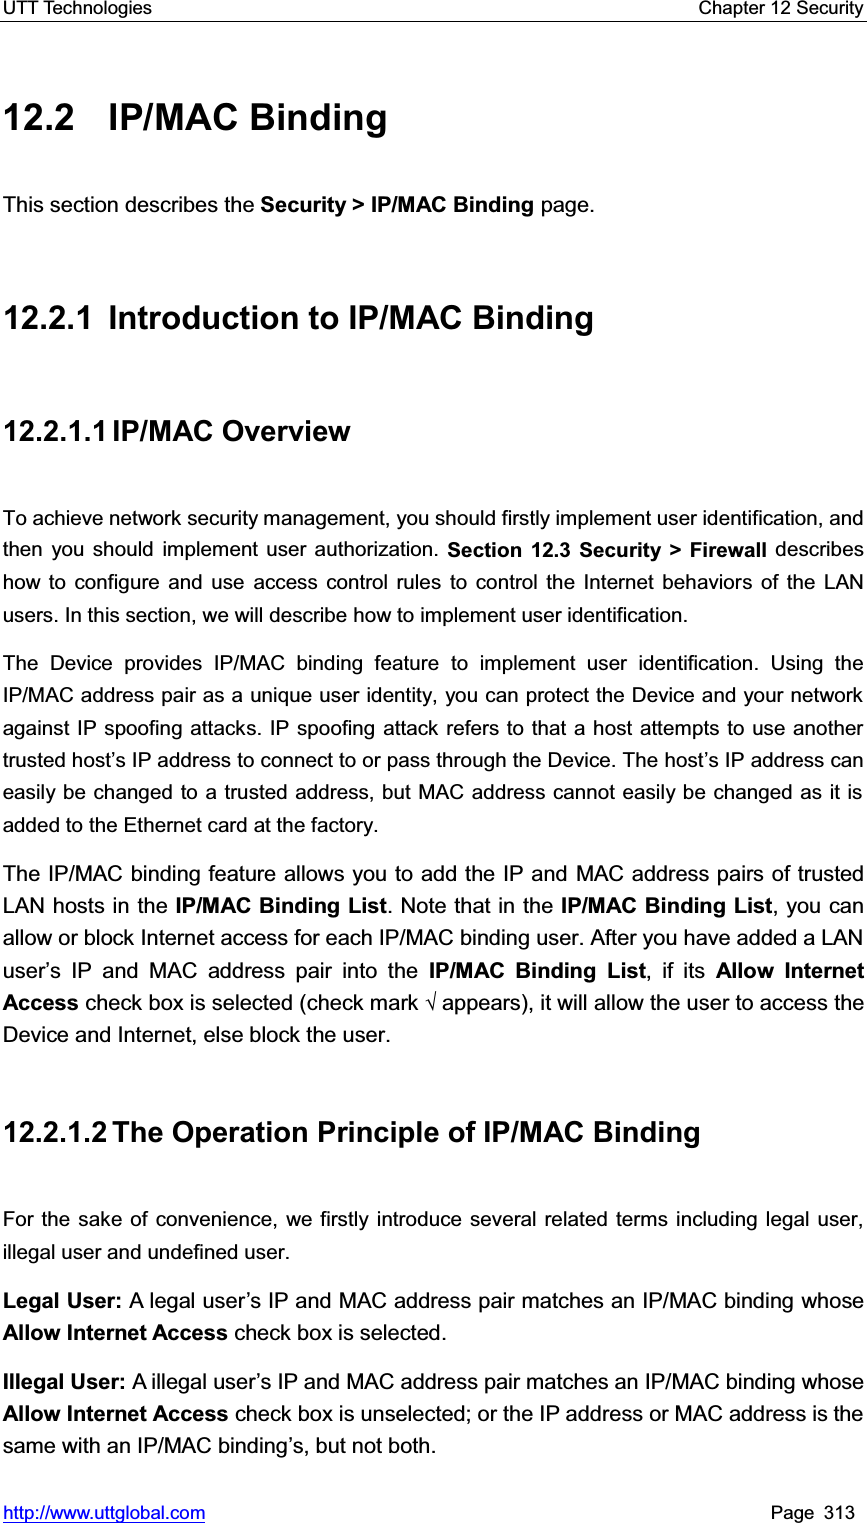 UTT Technologies    Chapter 12 Security   http://www.uttglobal.com Page 313 12.2 IP/MAC Binding This section describes the Security &gt; IP/MAC Binding page.  12.2.1 Introduction to IP/MAC Binding 12.2.1.1 IP/MAC Overview To achieve network security management, you should firstly implement user identification, and then you should implement user authorization. Section 12.3 Security &gt; Firewall describes how to configure and use access control rules to control the Internet behaviors of the LAN users. In this section, we will describe how to implement user identification. The Device provides IP/MAC binding feature to implement user identification. Using the IP/MAC address pair as a unique user identity, you can protect the Device and your network against IP spoofing attacks. IP spoofing attack refers to that a host attempts to use another trusted host¶s IP address to connect to or pass through the Device. The host¶s IP address can easily be changed to a trusted address, but MAC address cannot easily be changed as it is added to the Ethernet card at the factory.The IP/MAC binding feature allows you to add the IP and MAC address pairs of trusted LAN hosts in the IP/MAC Binding List. Note that in the IP/MAC Binding List, you can allow or block Internet access for each IP/MAC binding user. After you have added a LAN user¶s IP and MAC address pair into the IP/MAC Binding List, if its Allow Internet Access check box is selected (check mark ¥appears), it will allow the user to access the Device and Internet, else block the user. 12.2.1.2 The  Operation Principle  of  IP/MAC  Binding For the sake of convenience, we firstly introduce several related terms including legal user, illegal user and undefined user.   Legal User: A legal user¶s IP and MAC address pair matches an IP/MAC binding whose Allow Internet Access check box is selected.   Illegal User: A illegal user¶s IP and MAC address pair matches an IP/MAC binding whoseAllow Internet Access check box is unselected; or the IP address or MAC address is the same with an IP/MAC binding¶s, but not both.   